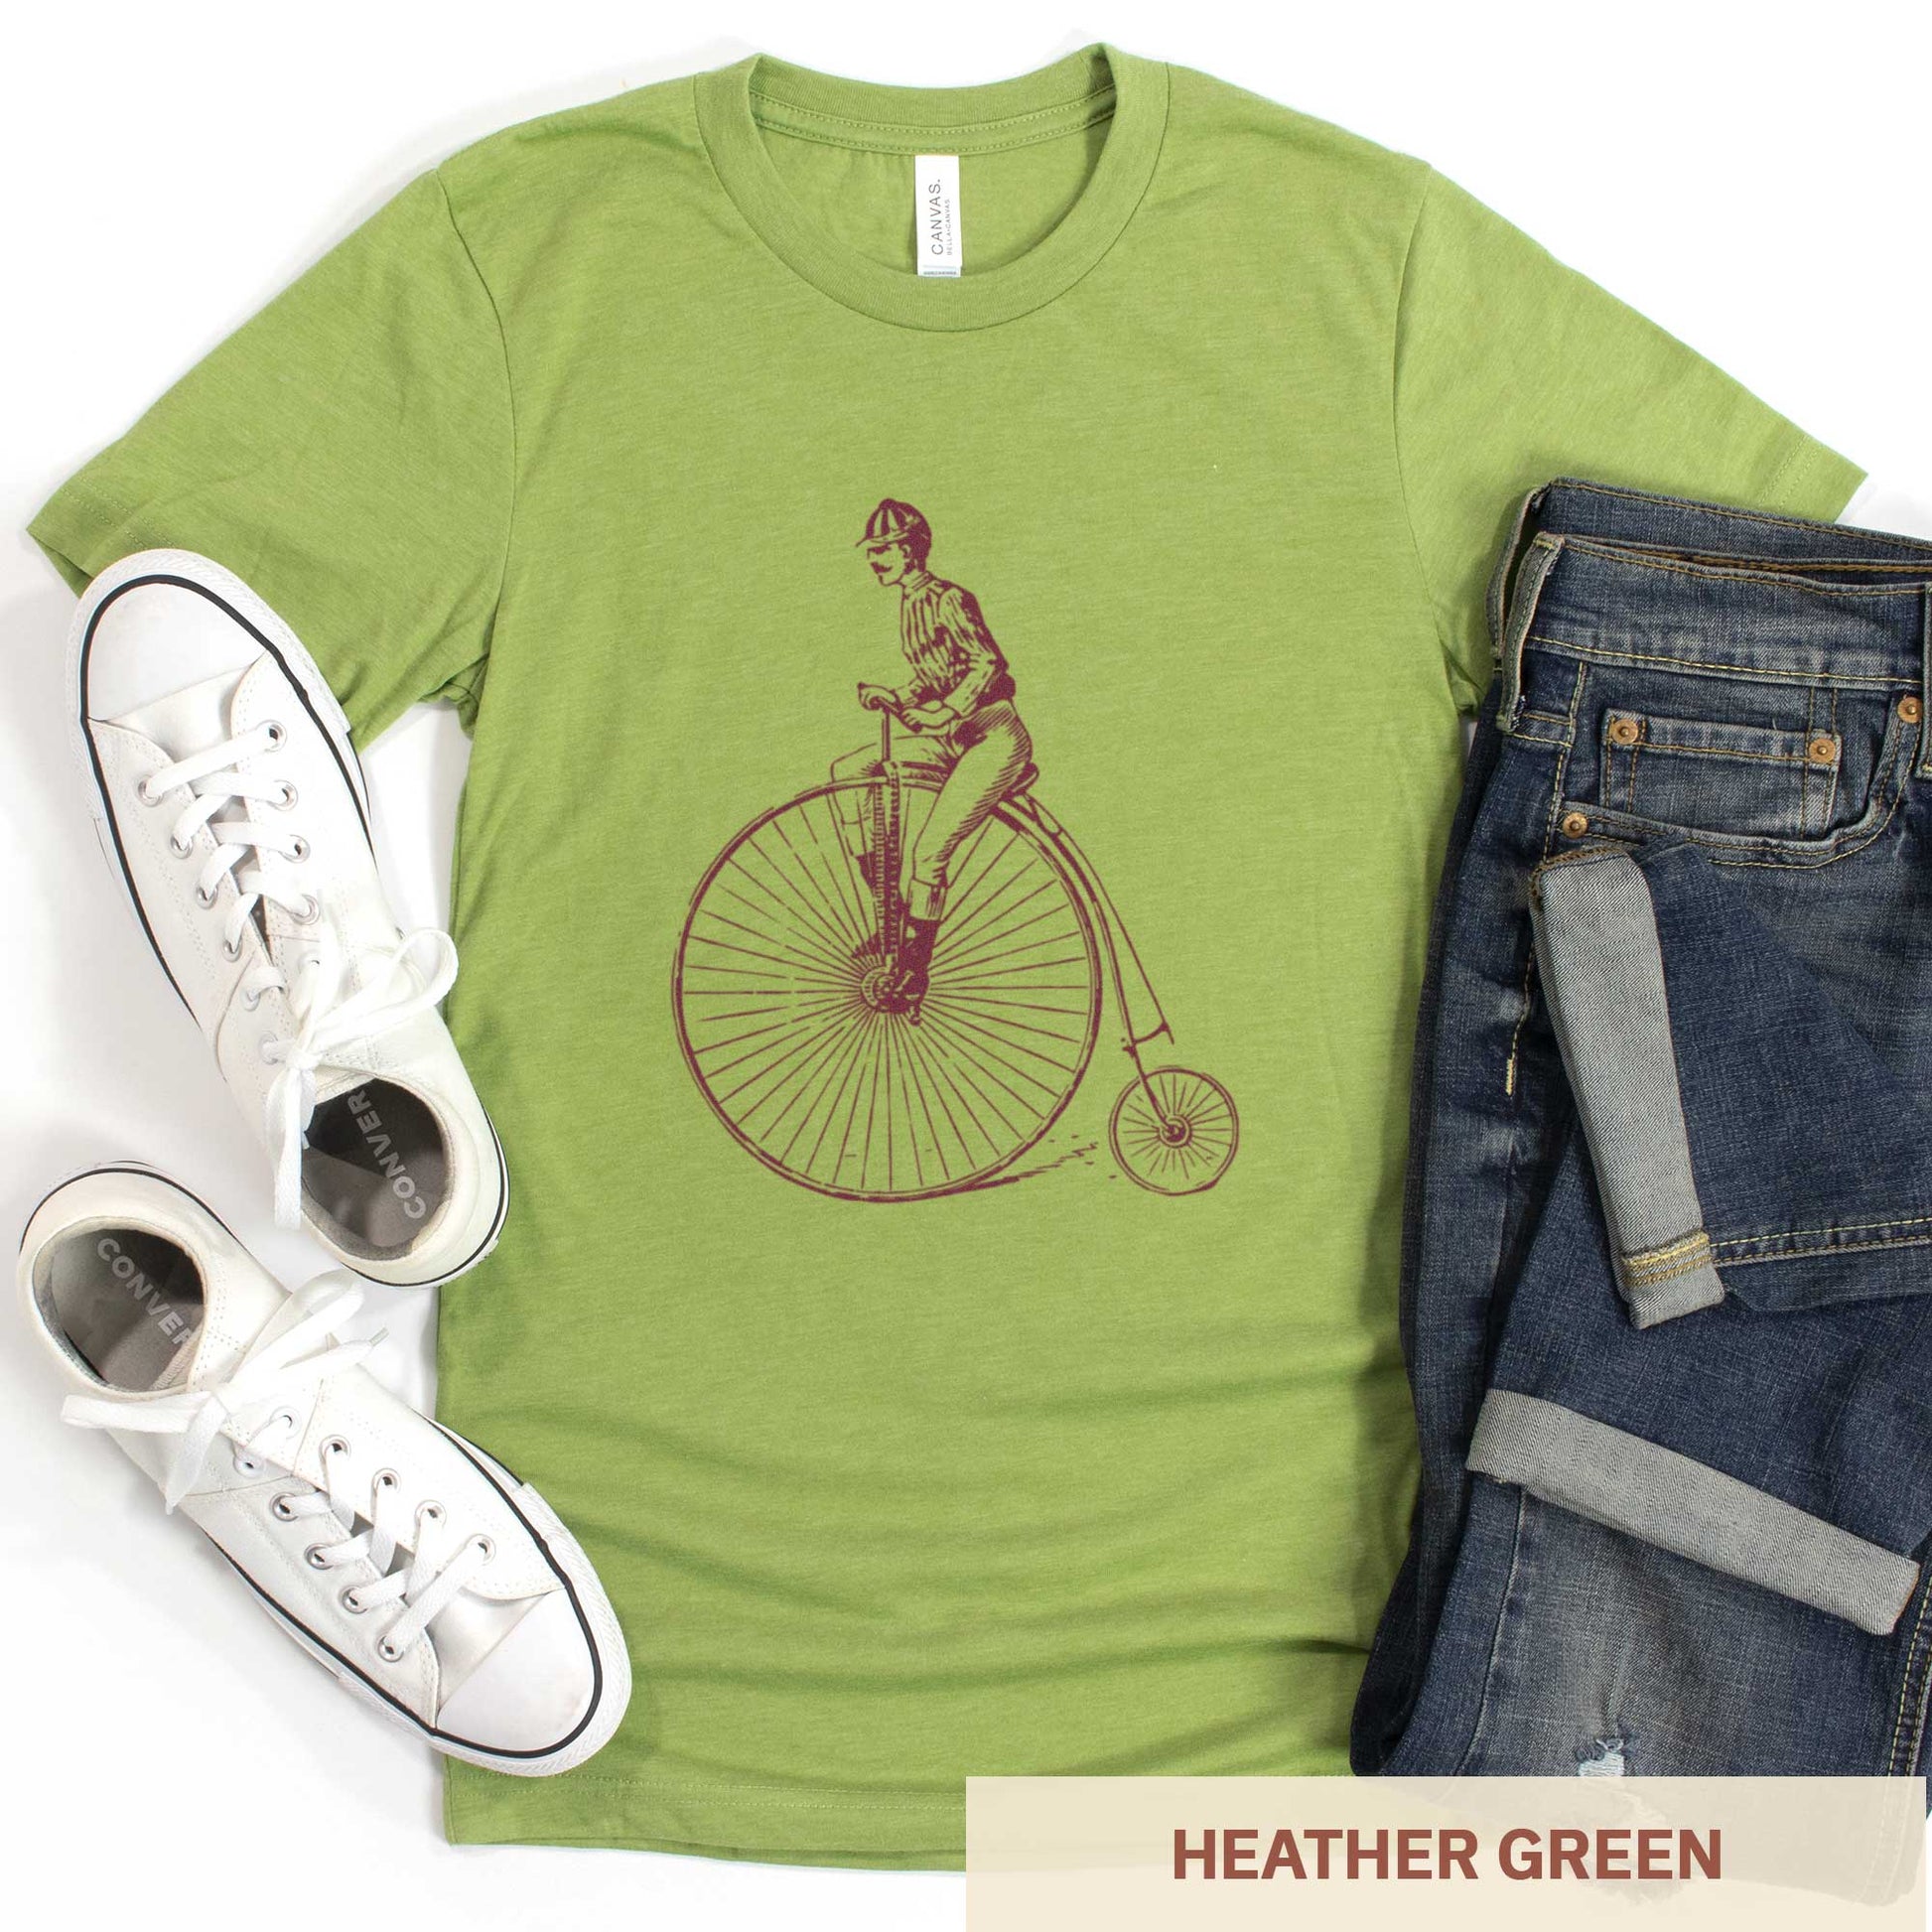 An heather green Bella Canvas t-shirt featuring a Victorian man riding a penny farthing bicycle.